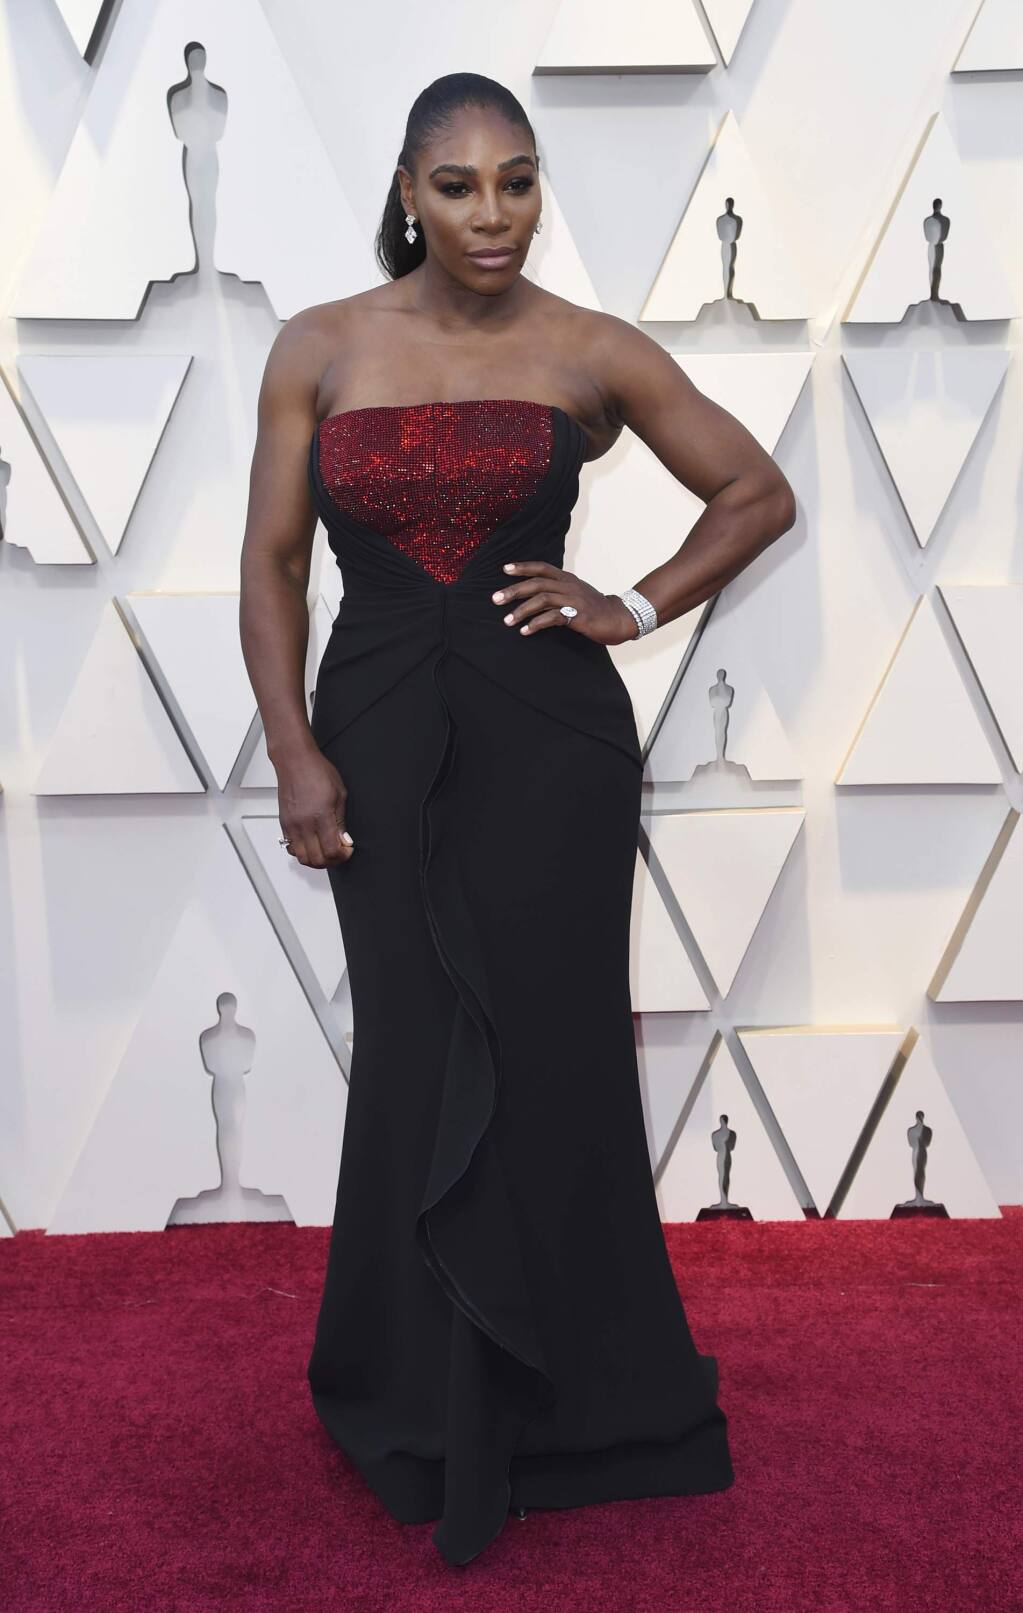 Serena Williams arrives at the Oscars on Sunday, Feb. 24, 2019, at the Dolby Theatre in Los Angeles. (Photo by Richard Shotwell/Invision/AP)